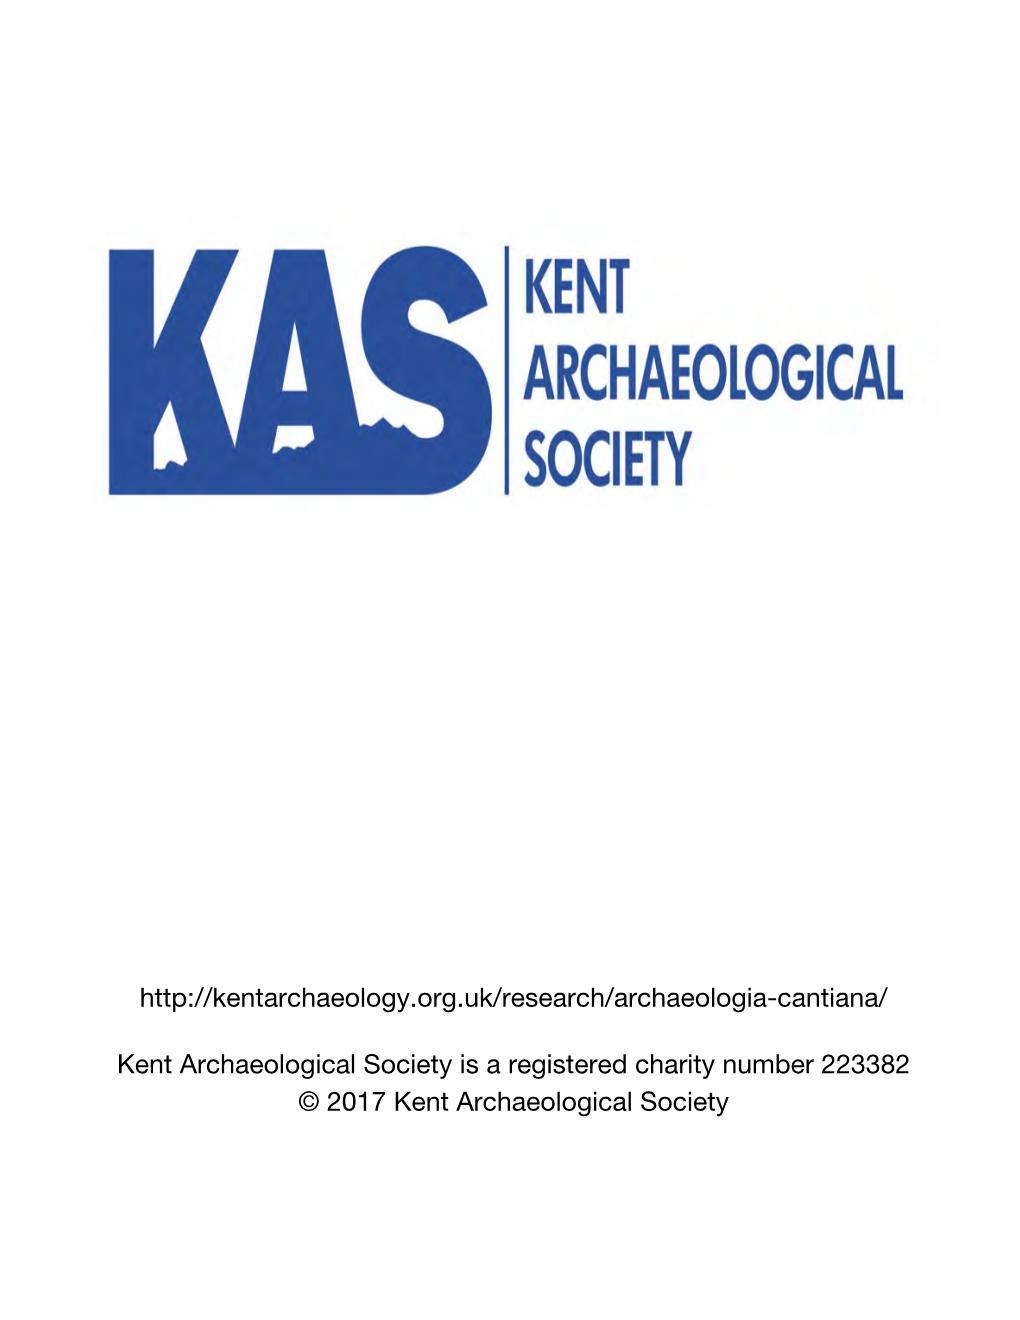 Archaeology and the Channel Tunnel